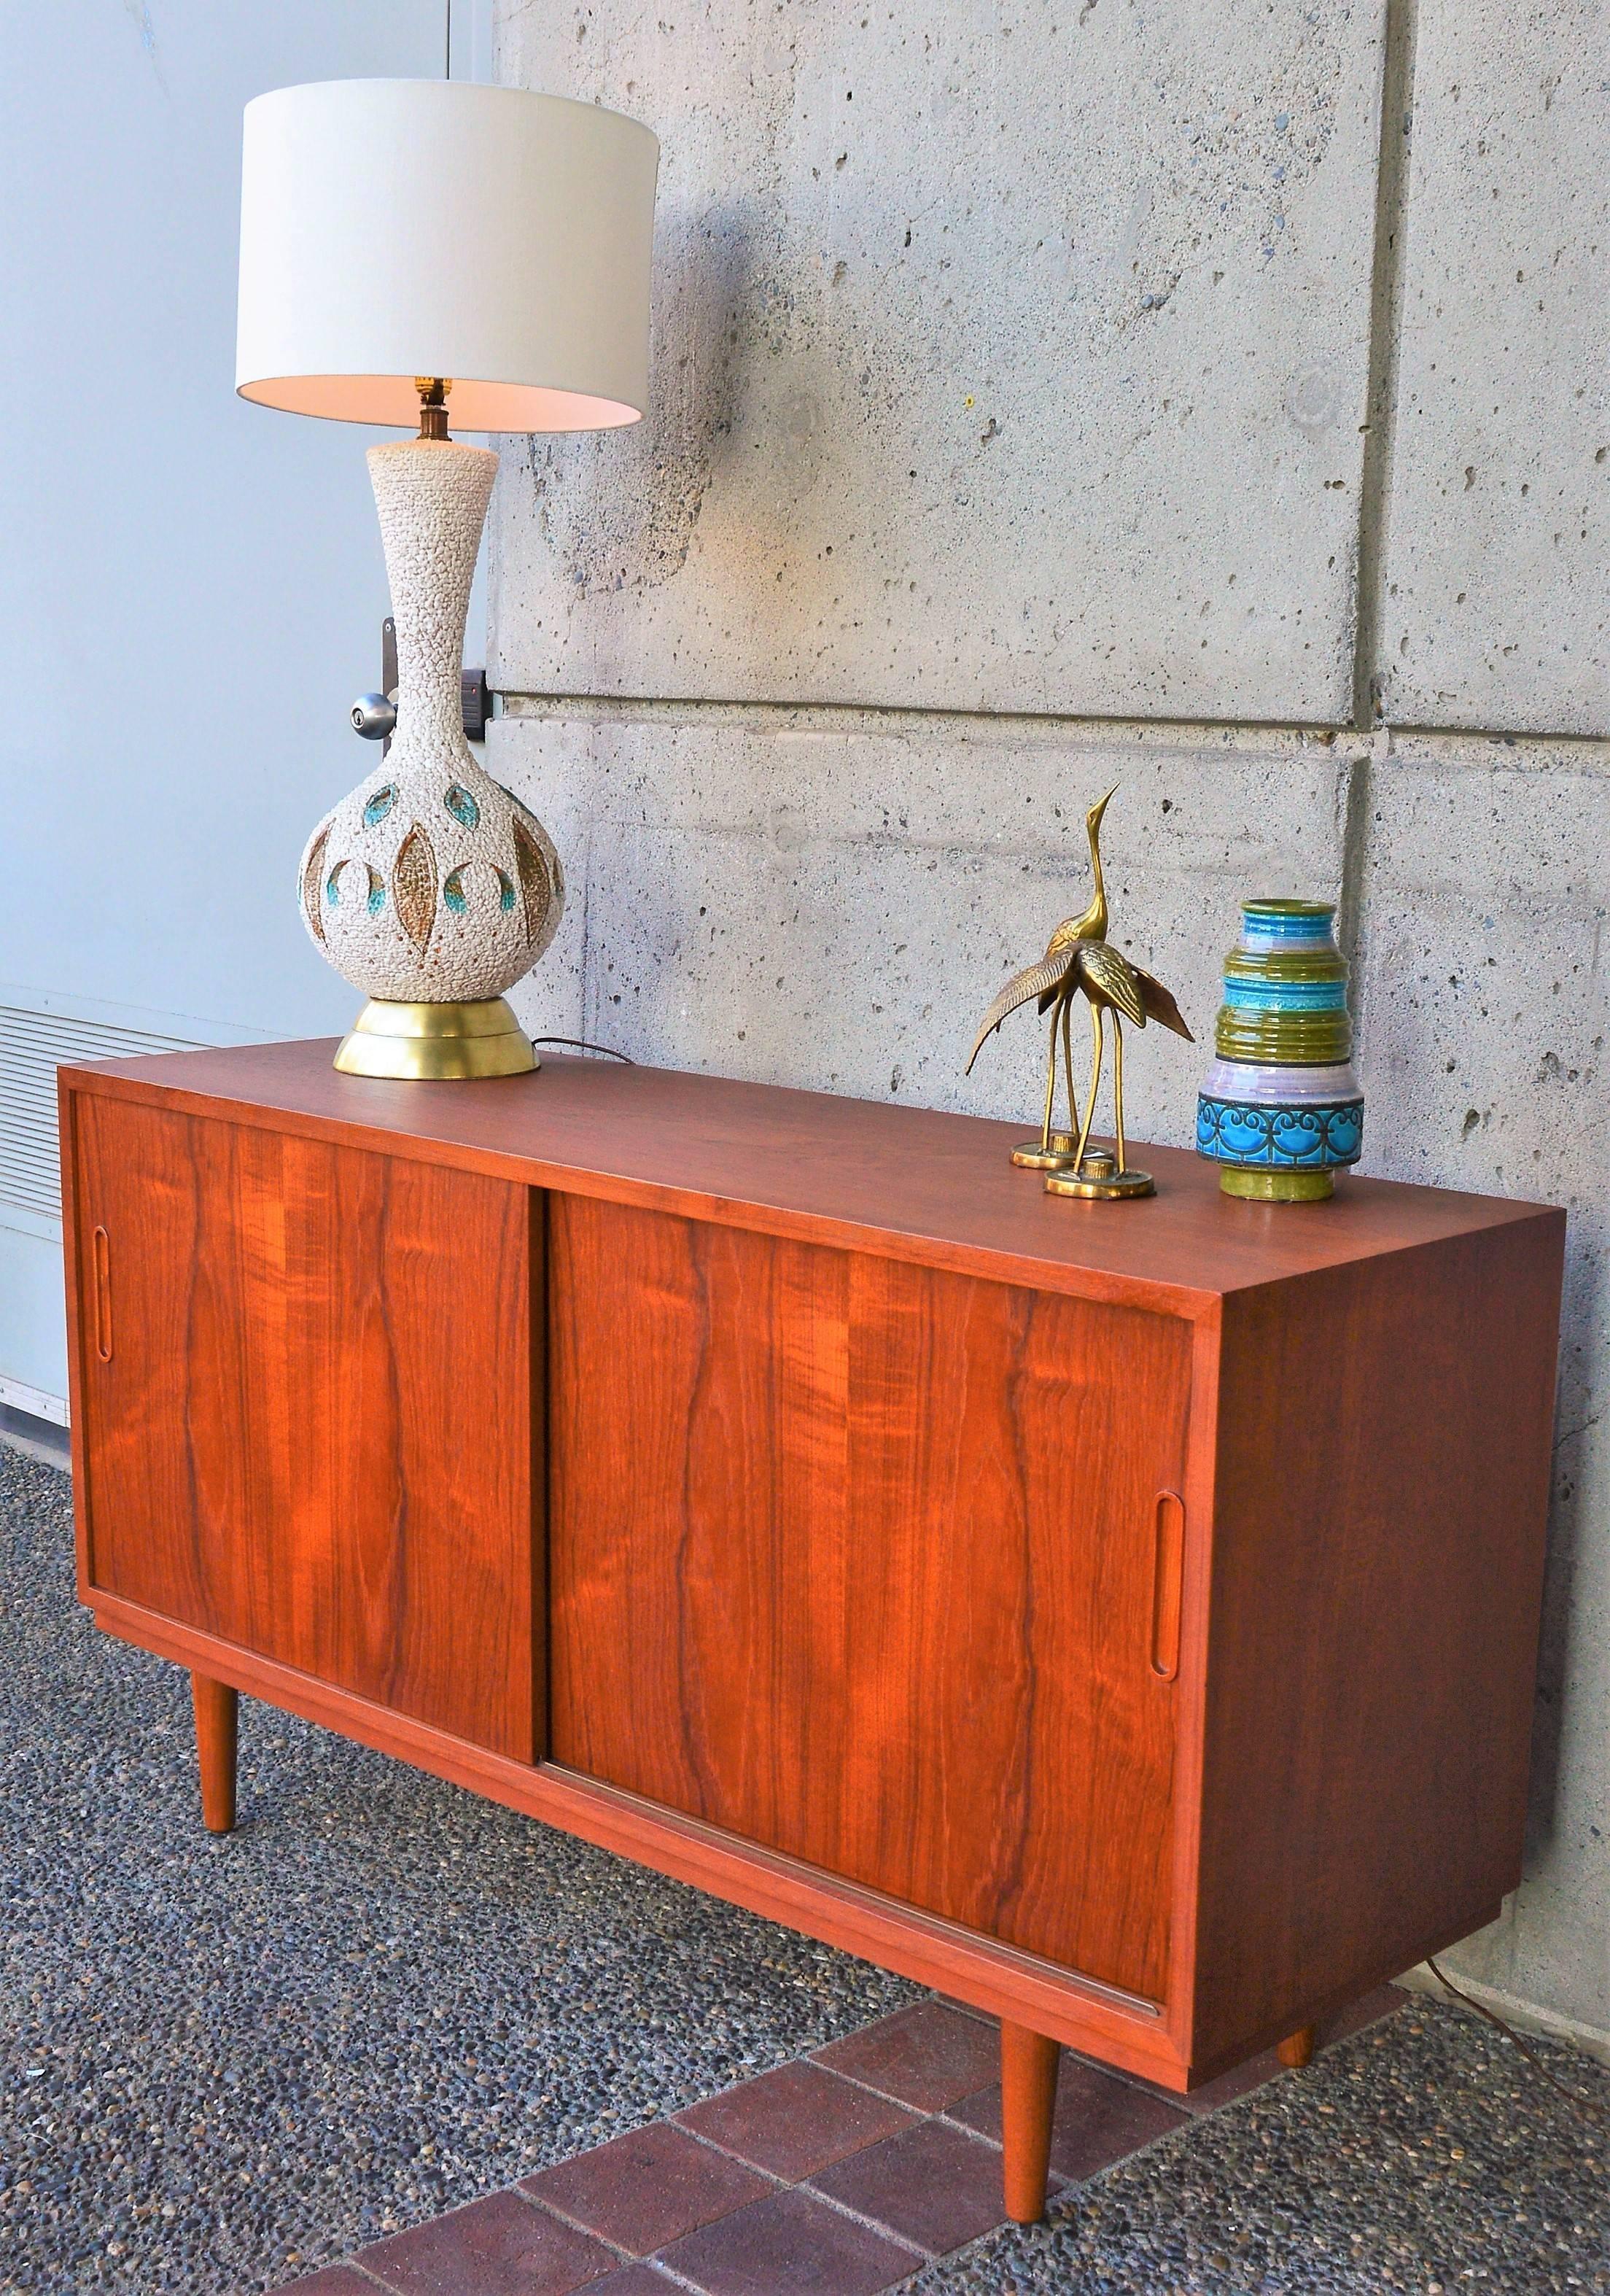 Mid-Century Modern Poul Hundevad All Wood Teak and Birch Compact Credenza or Buffet